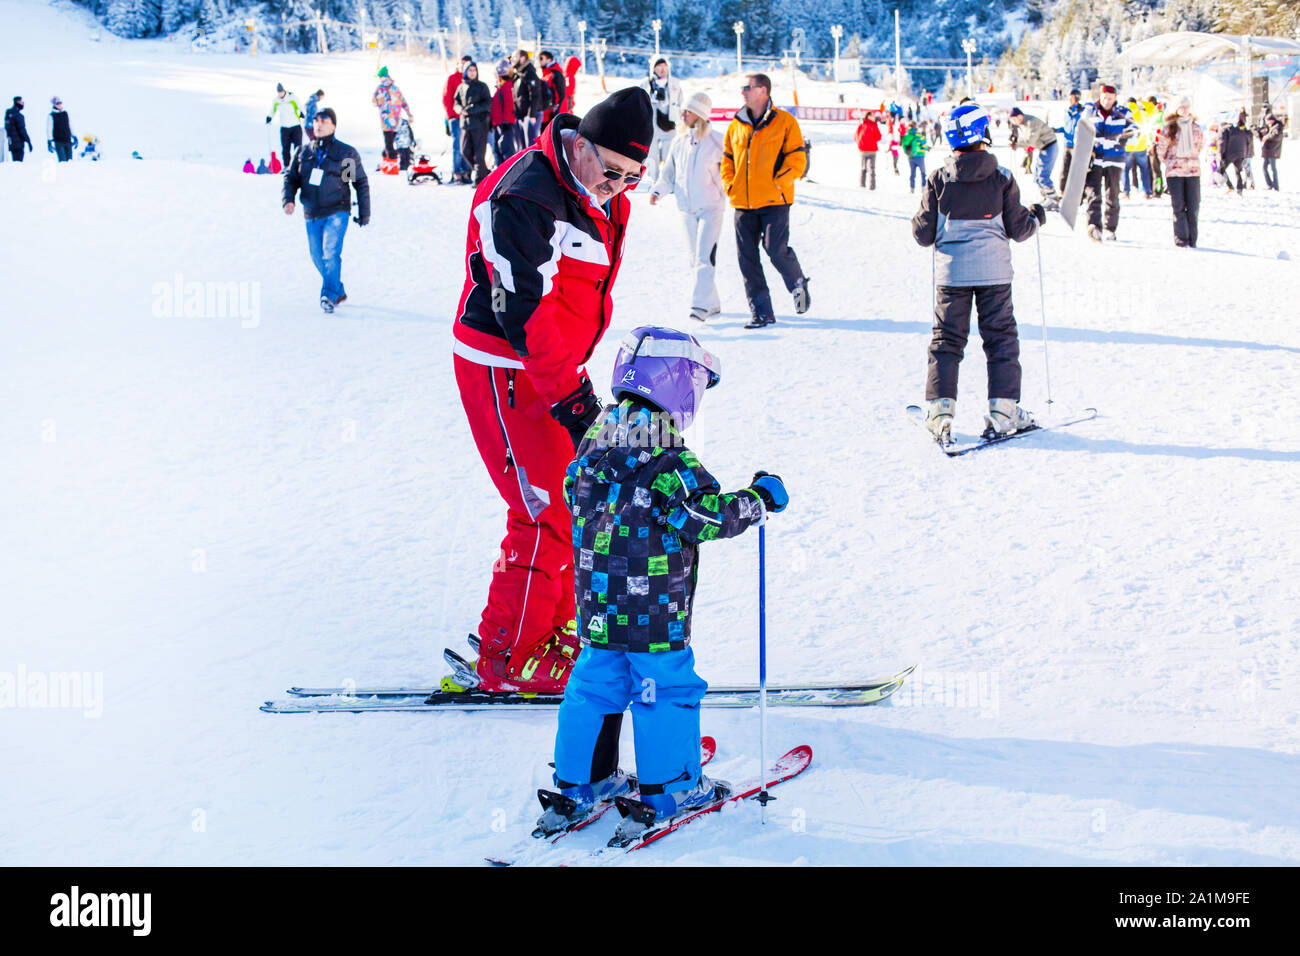 Bansko, Bulgaria - December, 12, 2015: The small child learning to ski and man on the slope in Bansko, Bulgaria Stock Photo